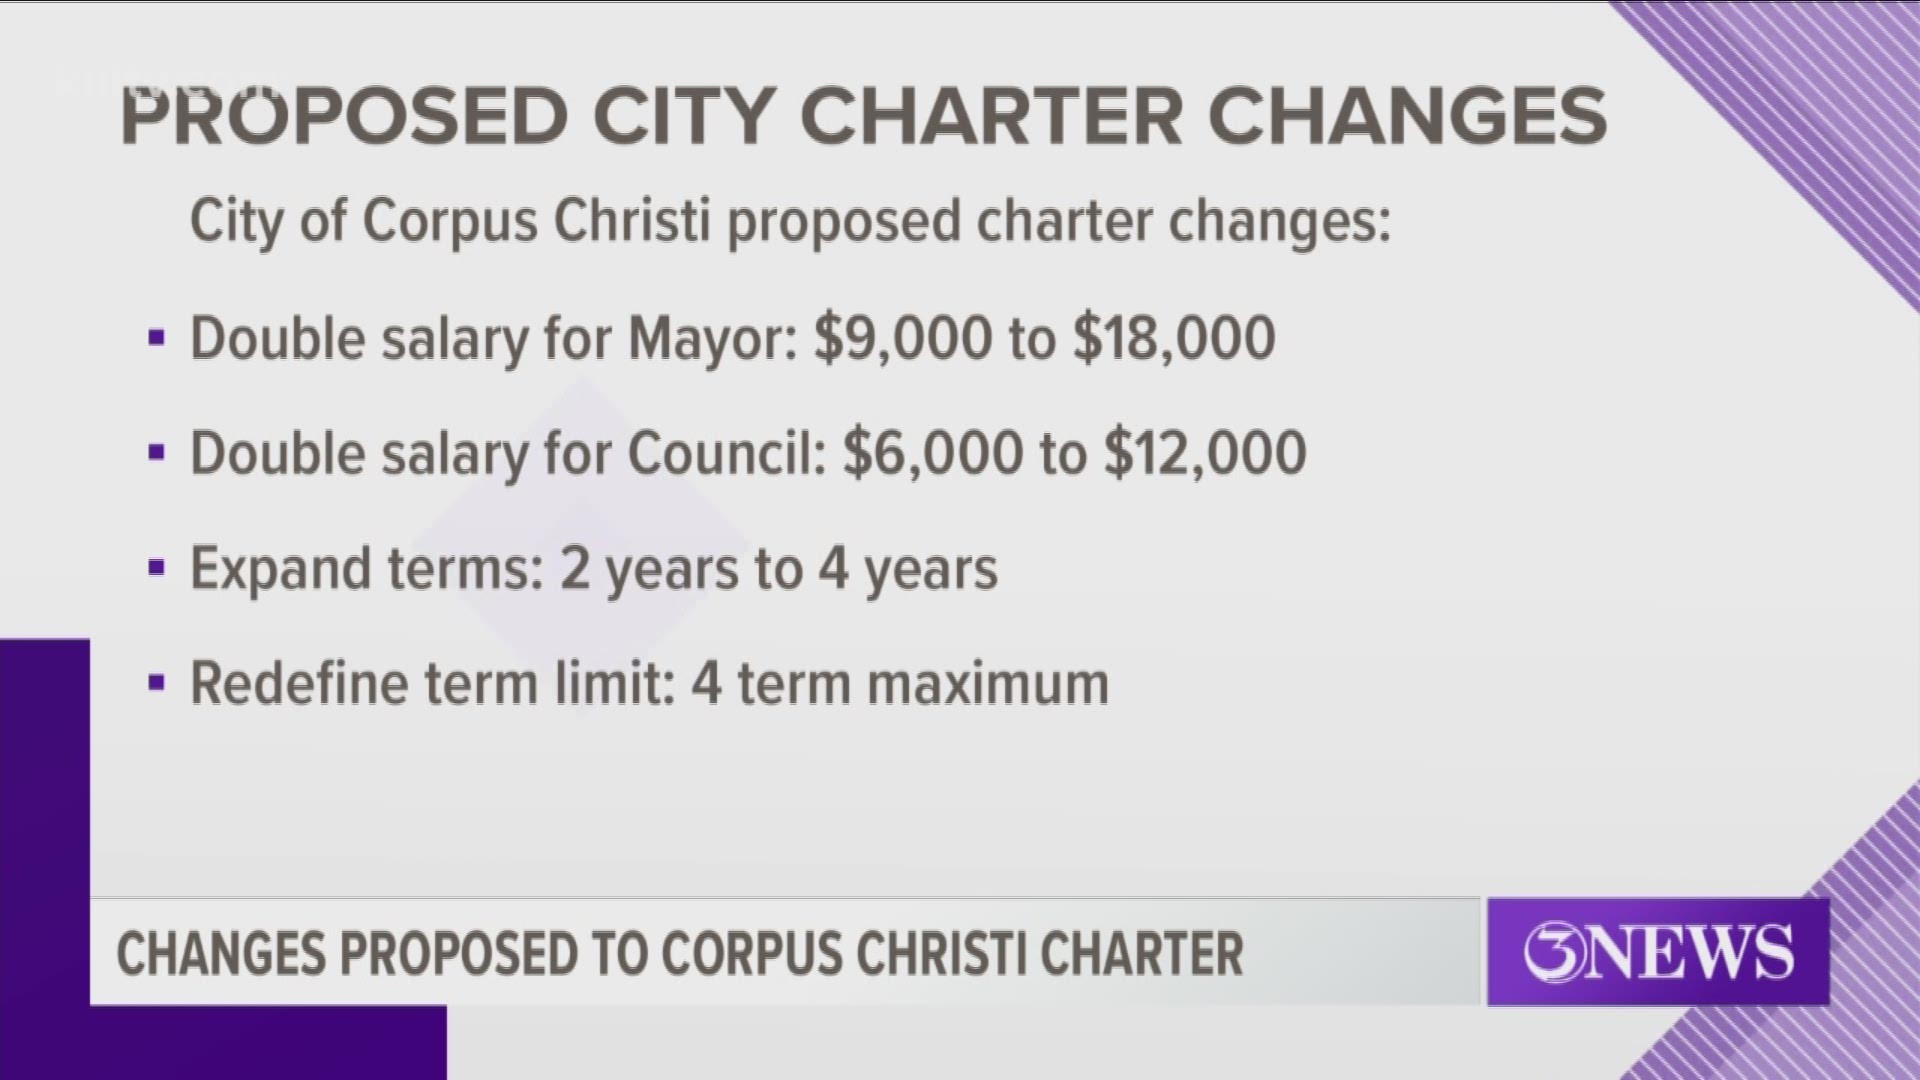 Among those propositions are moves to double the current salary of Corpus Christi's mayor and council members, as well as double their maximum term length.